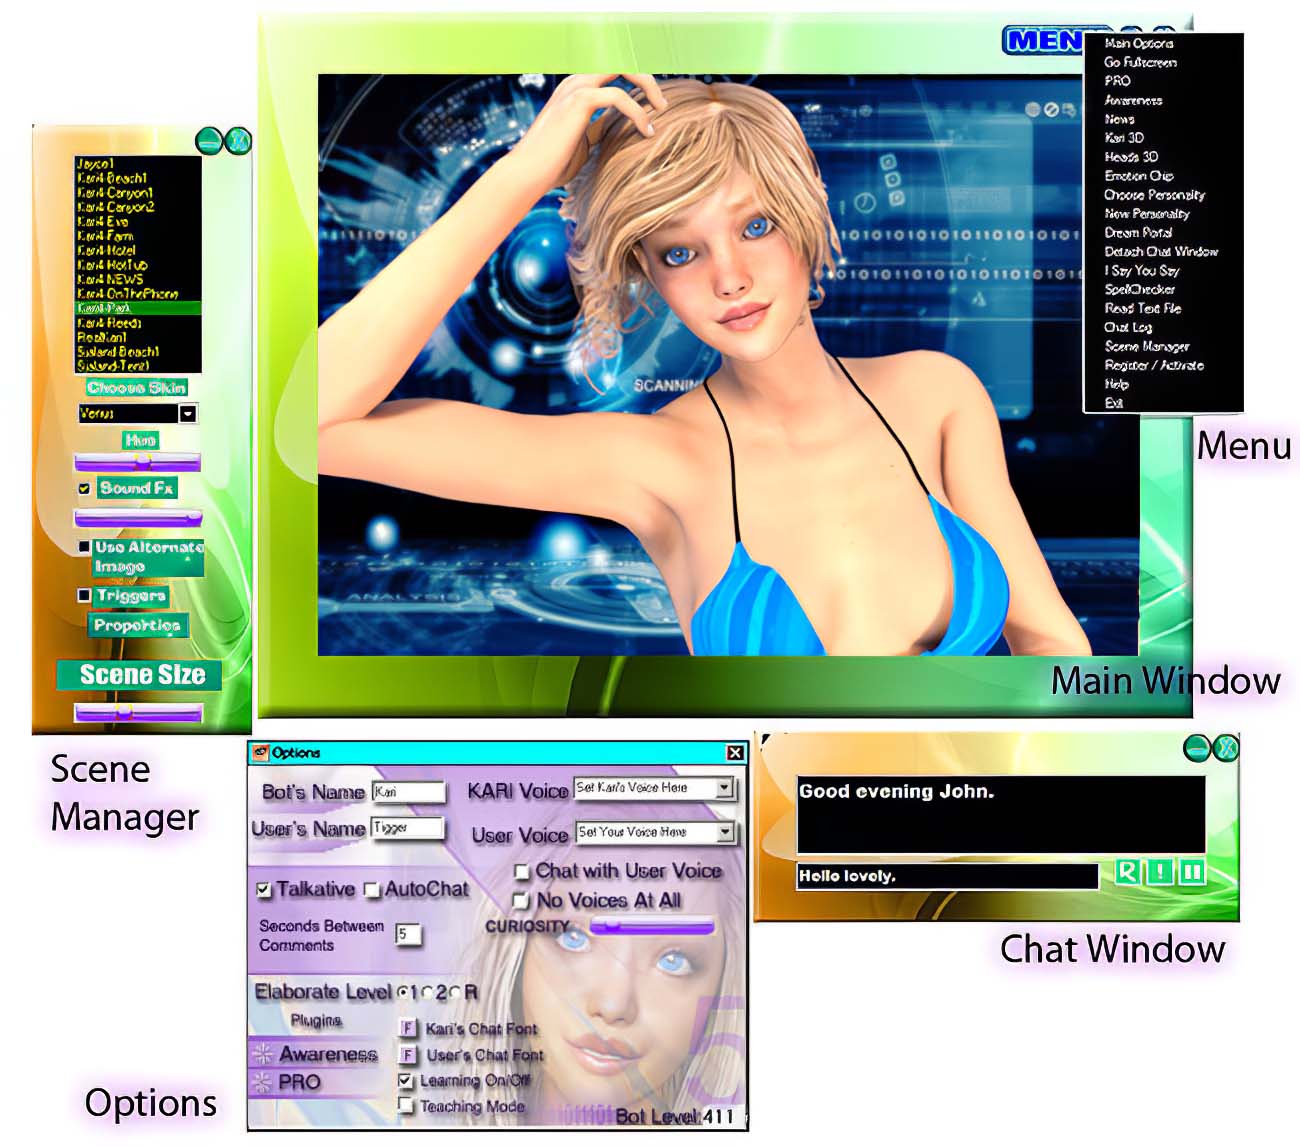 Kari is a virtual girlfriend simulation with the latest Artificial Intelligence.